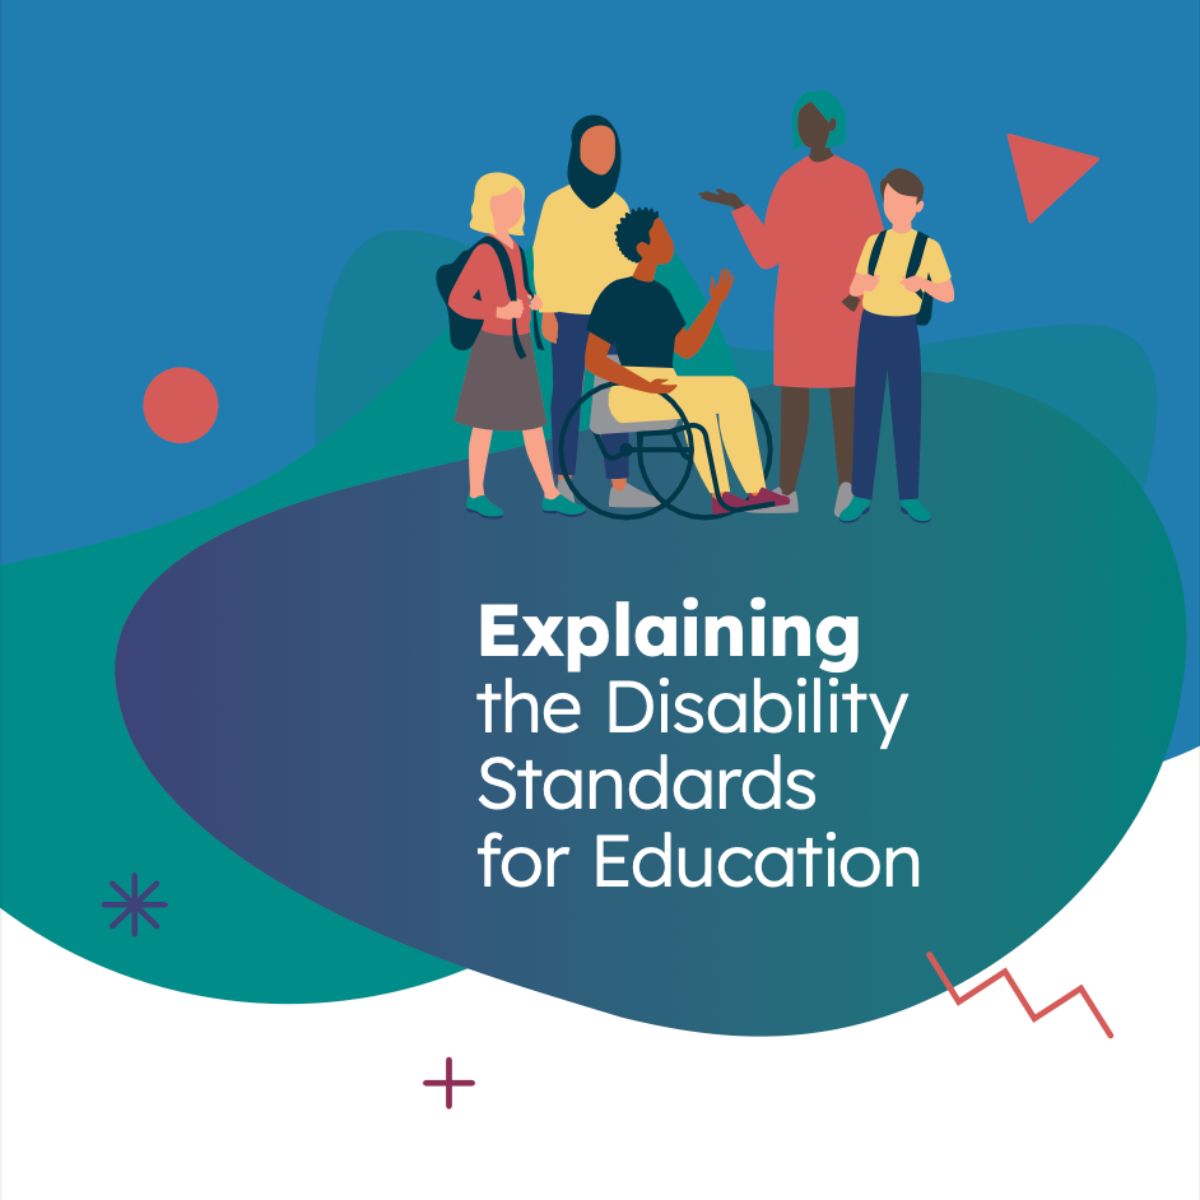 A simple illustration of a teacher speaking to a group of teenage students, one of whom uses a wheelchair, over green and blue blobs. Text reads: "Explaining the Disability Standards for Education".